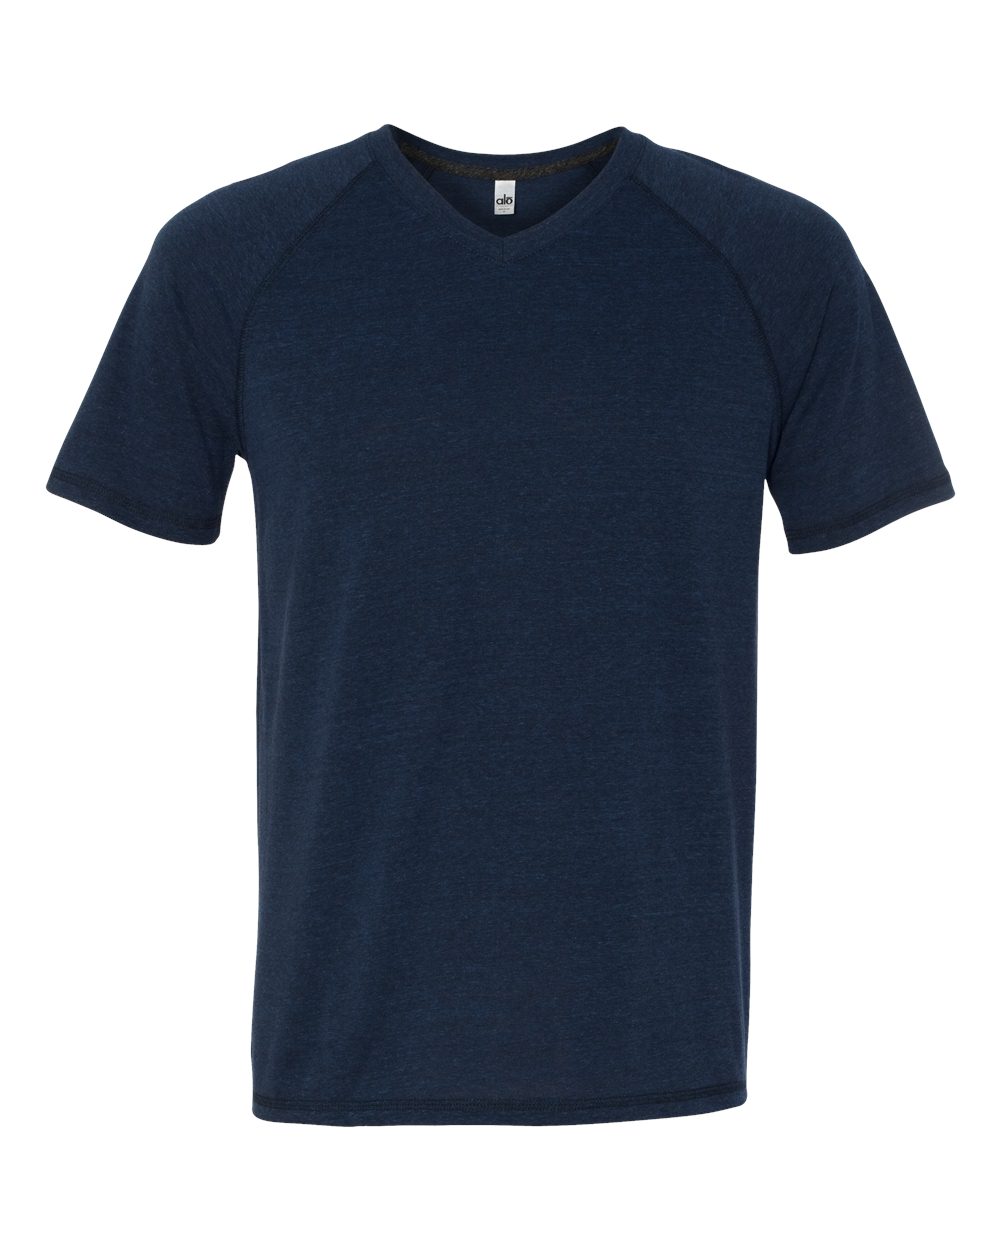 click to view Navy Heather Triblend